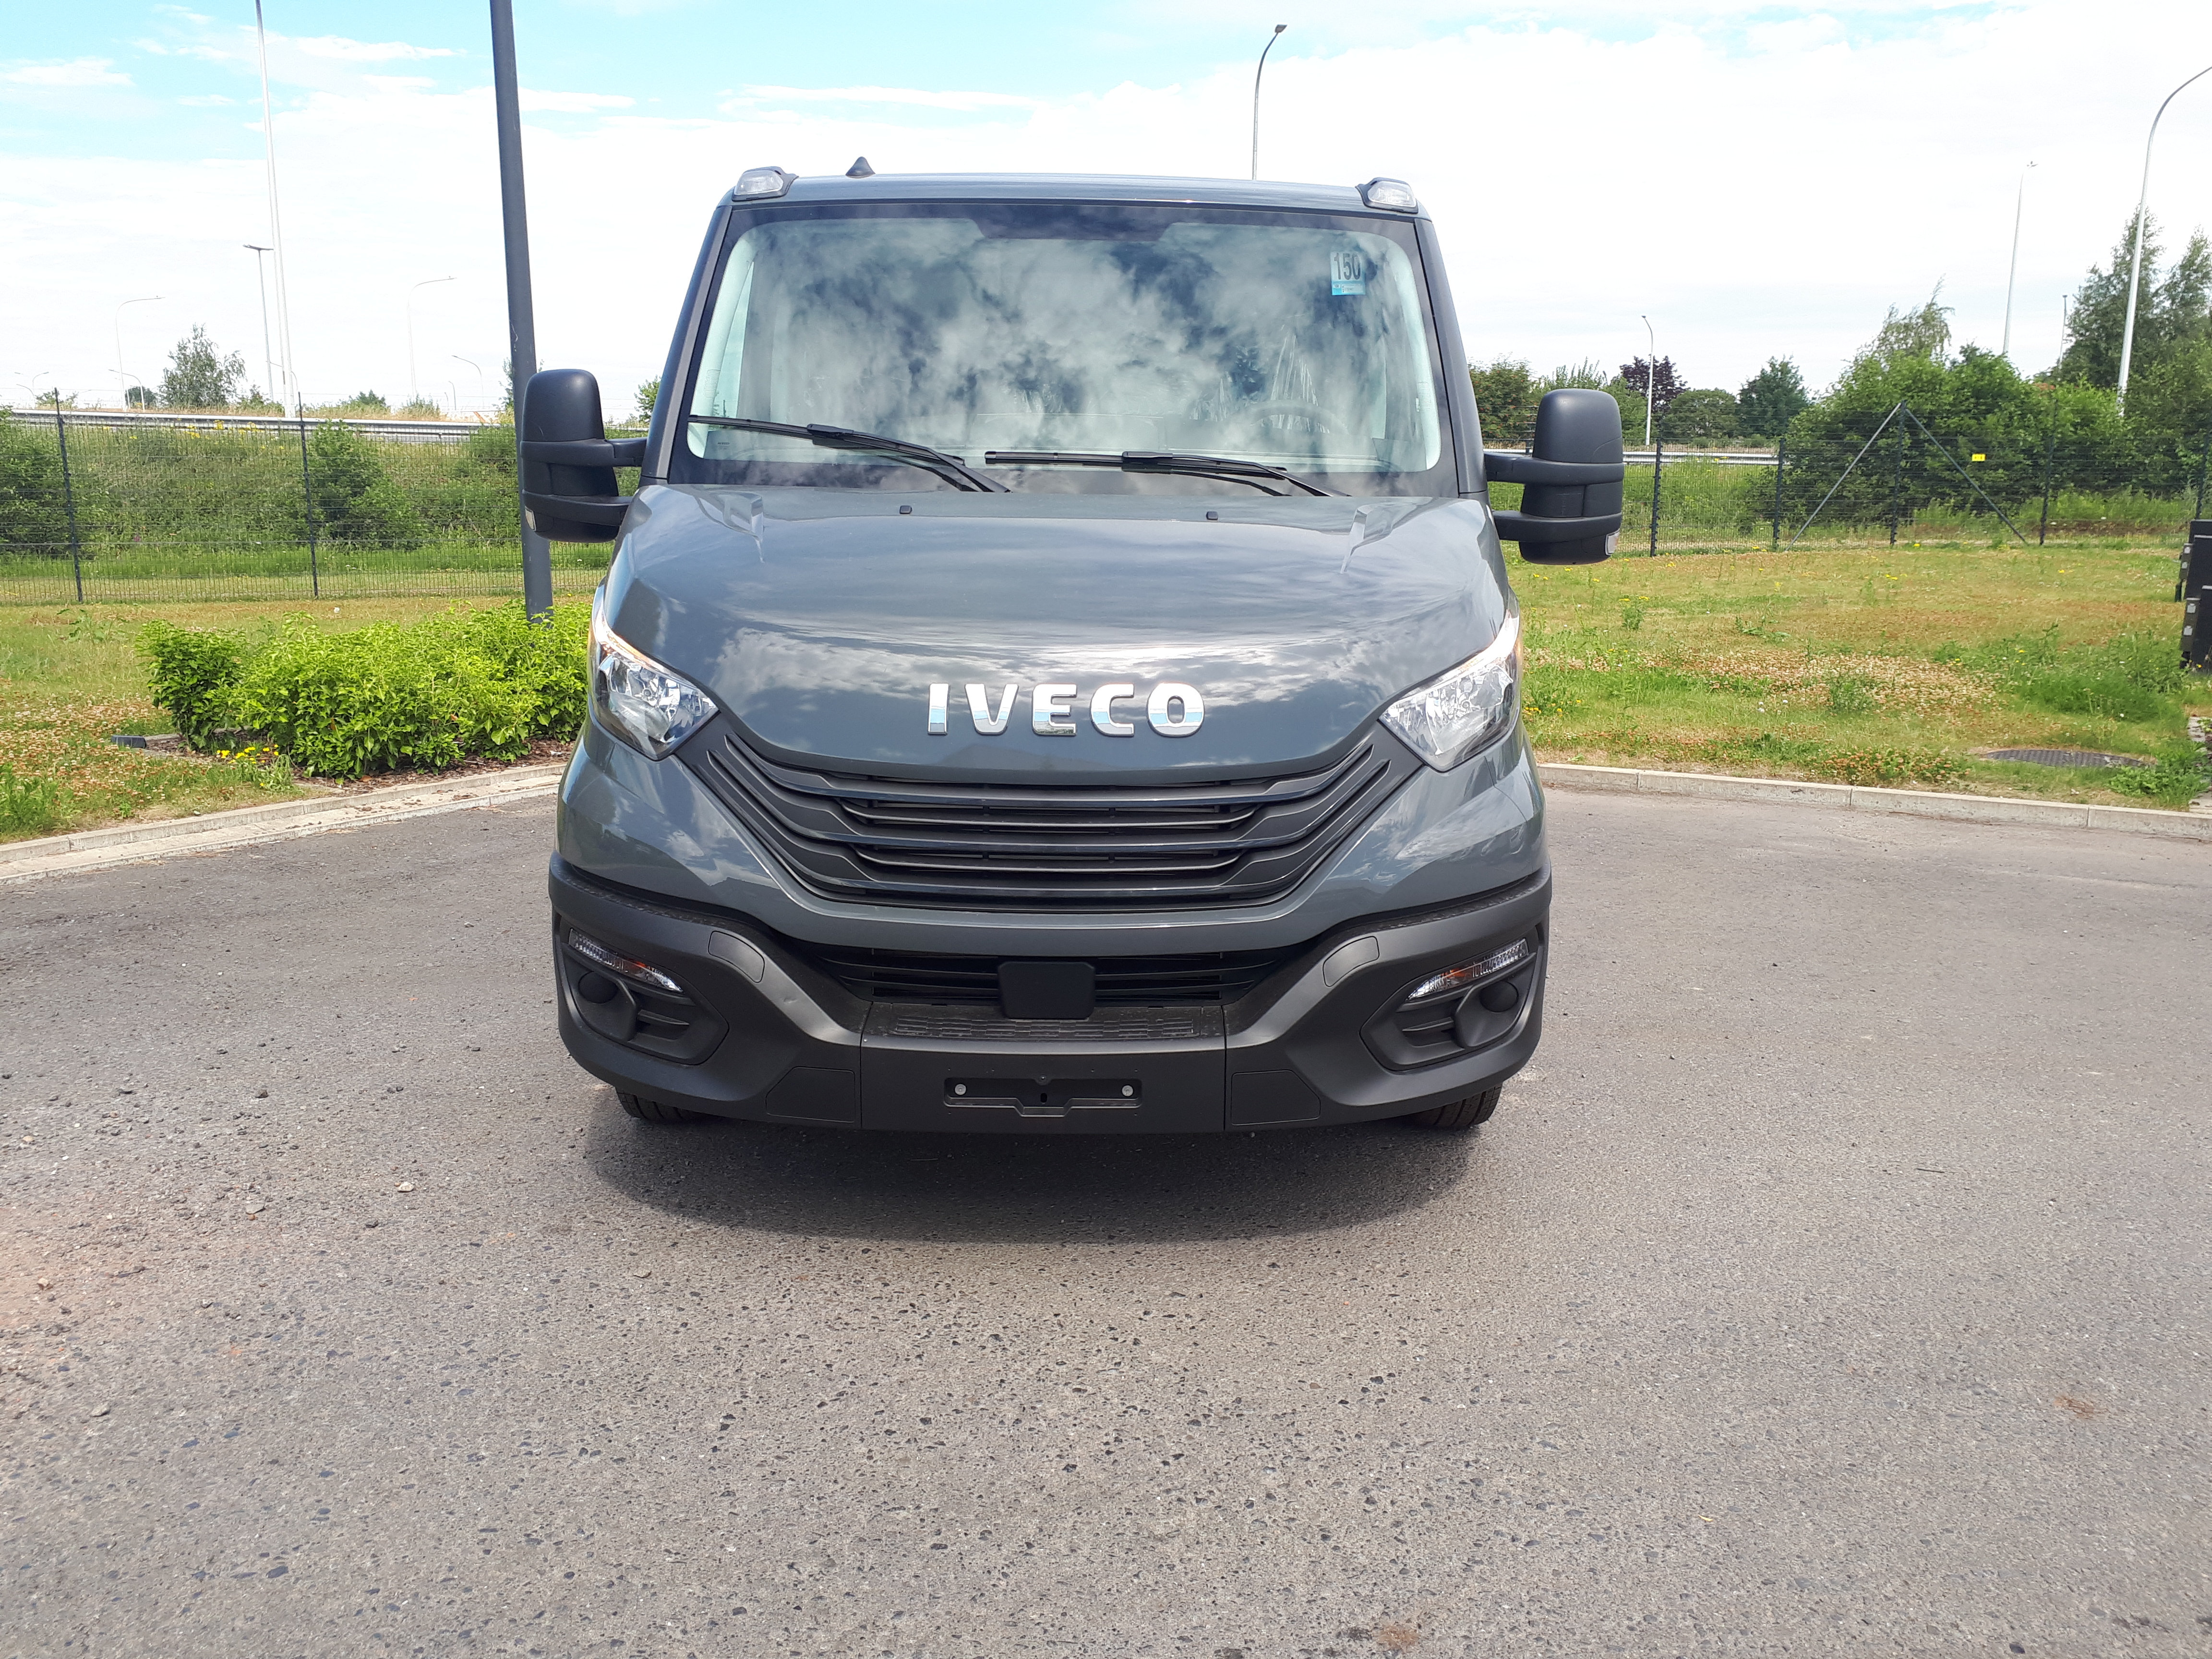 IVECO DAILY MY22 35C16H3.0?width=462